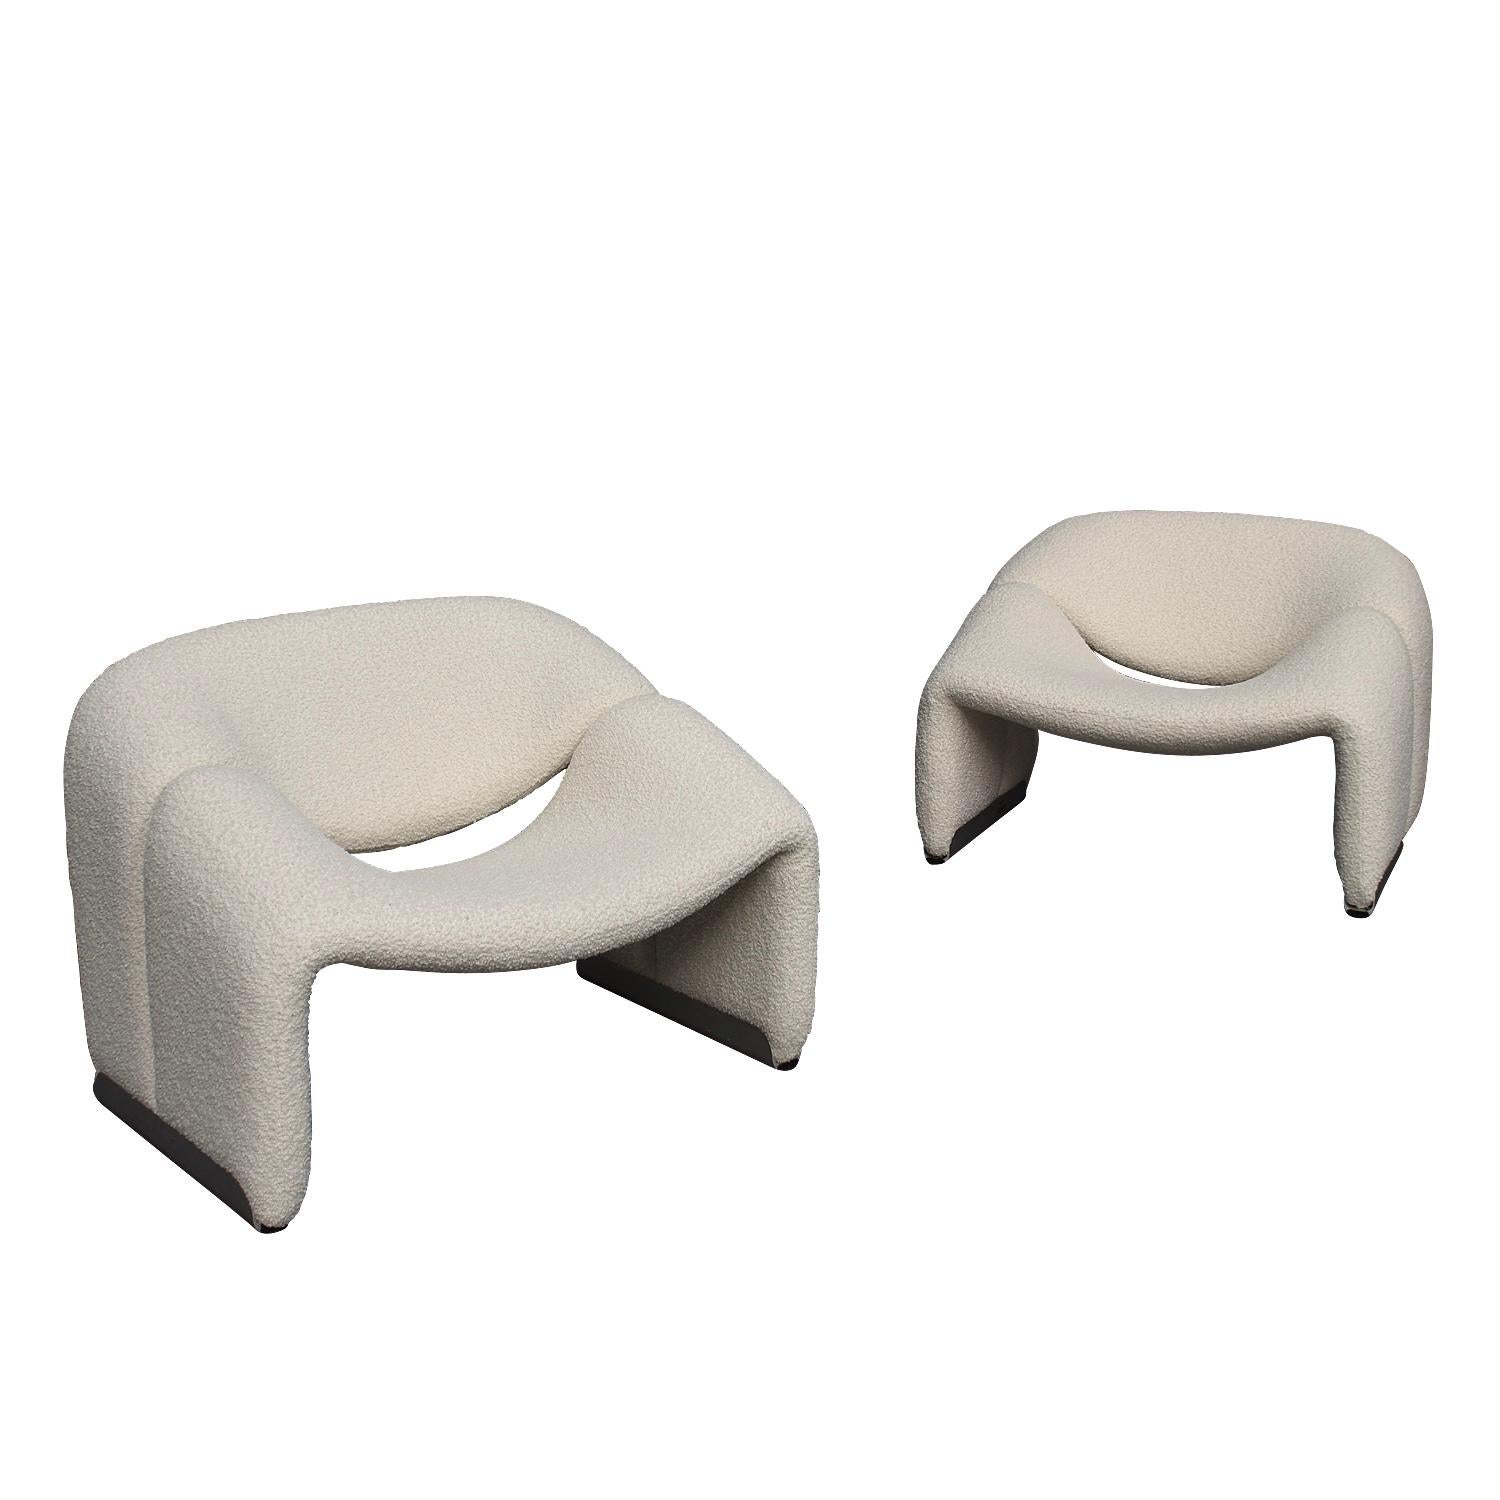 Pair of ‘Groovy’ F598 lounge chairs by Pierre Paulin for Artifort, Netherlands, 1972.

The chair has been reupholstered in a beautiful off-white bouclé wool fabric by Bisson Bruneel (France). The cold foam interior has also been